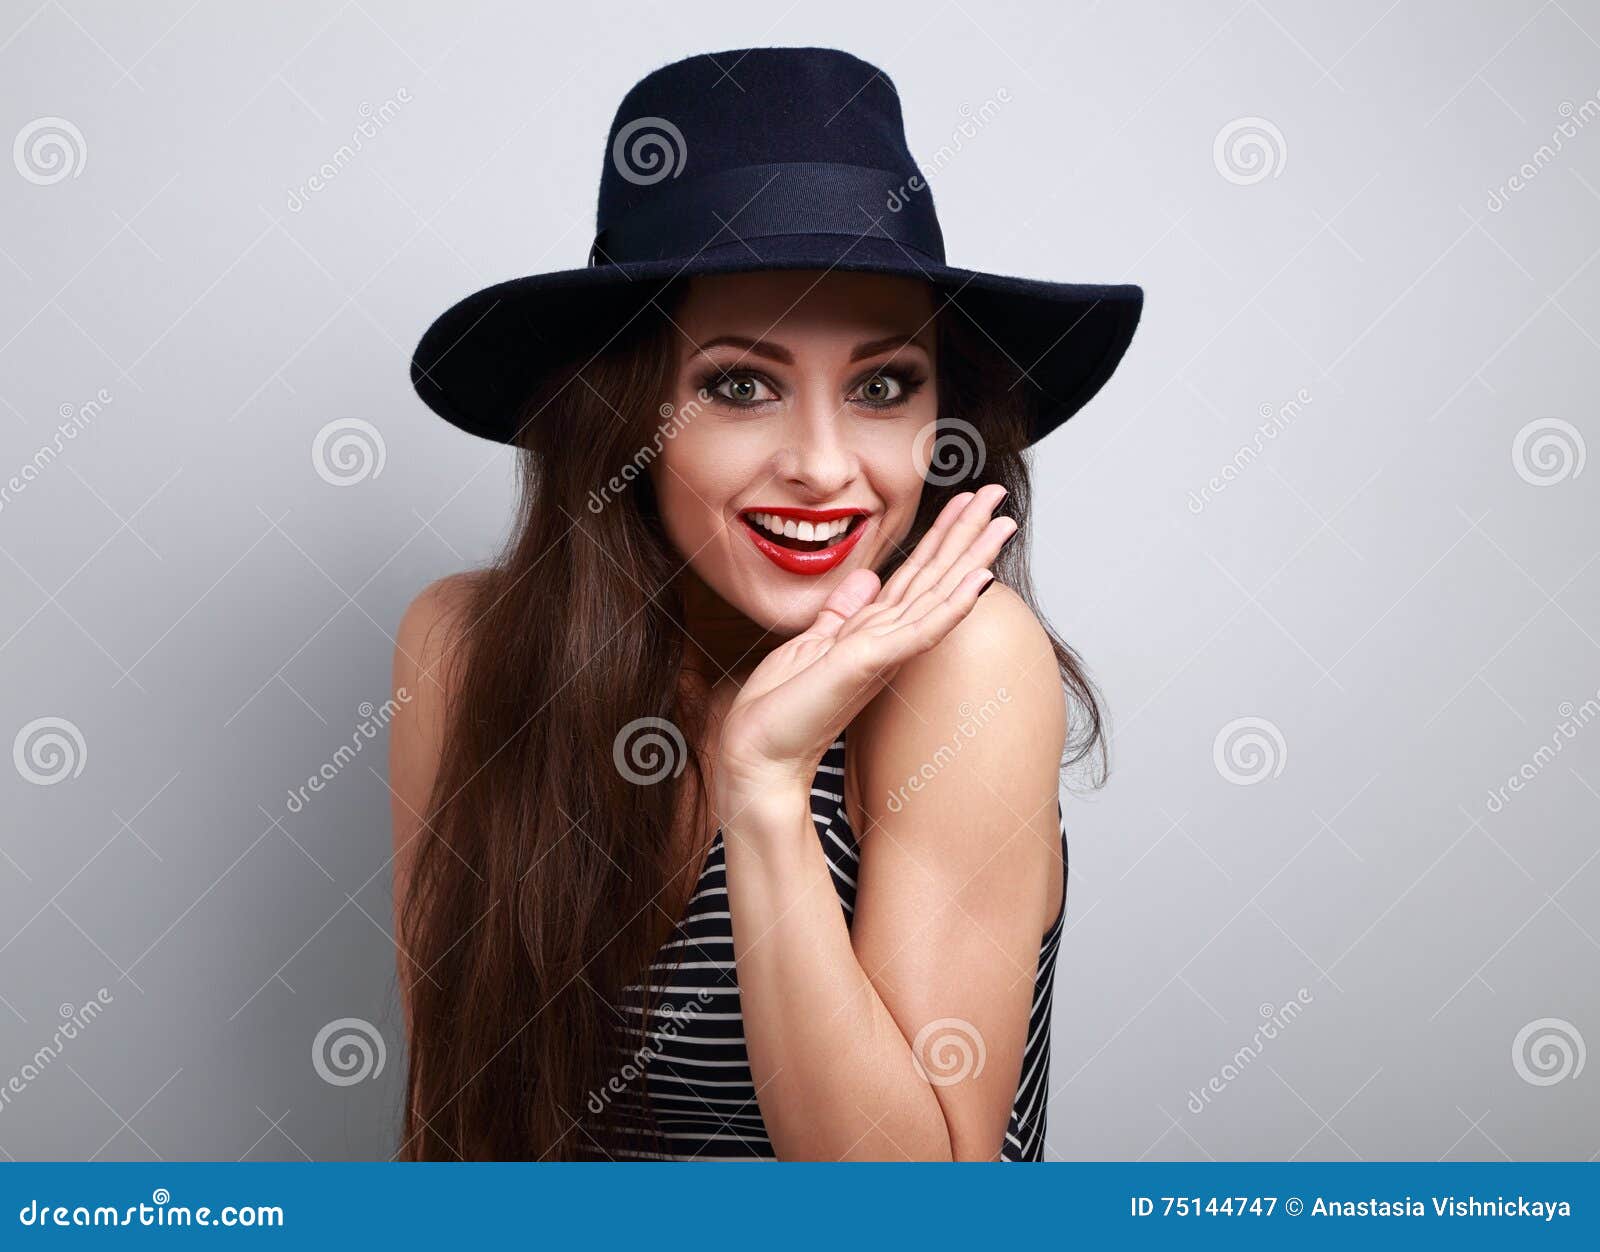 Happy Bright Makeup Surprising Woman Looking Fun in Fashion Blue Stock ...